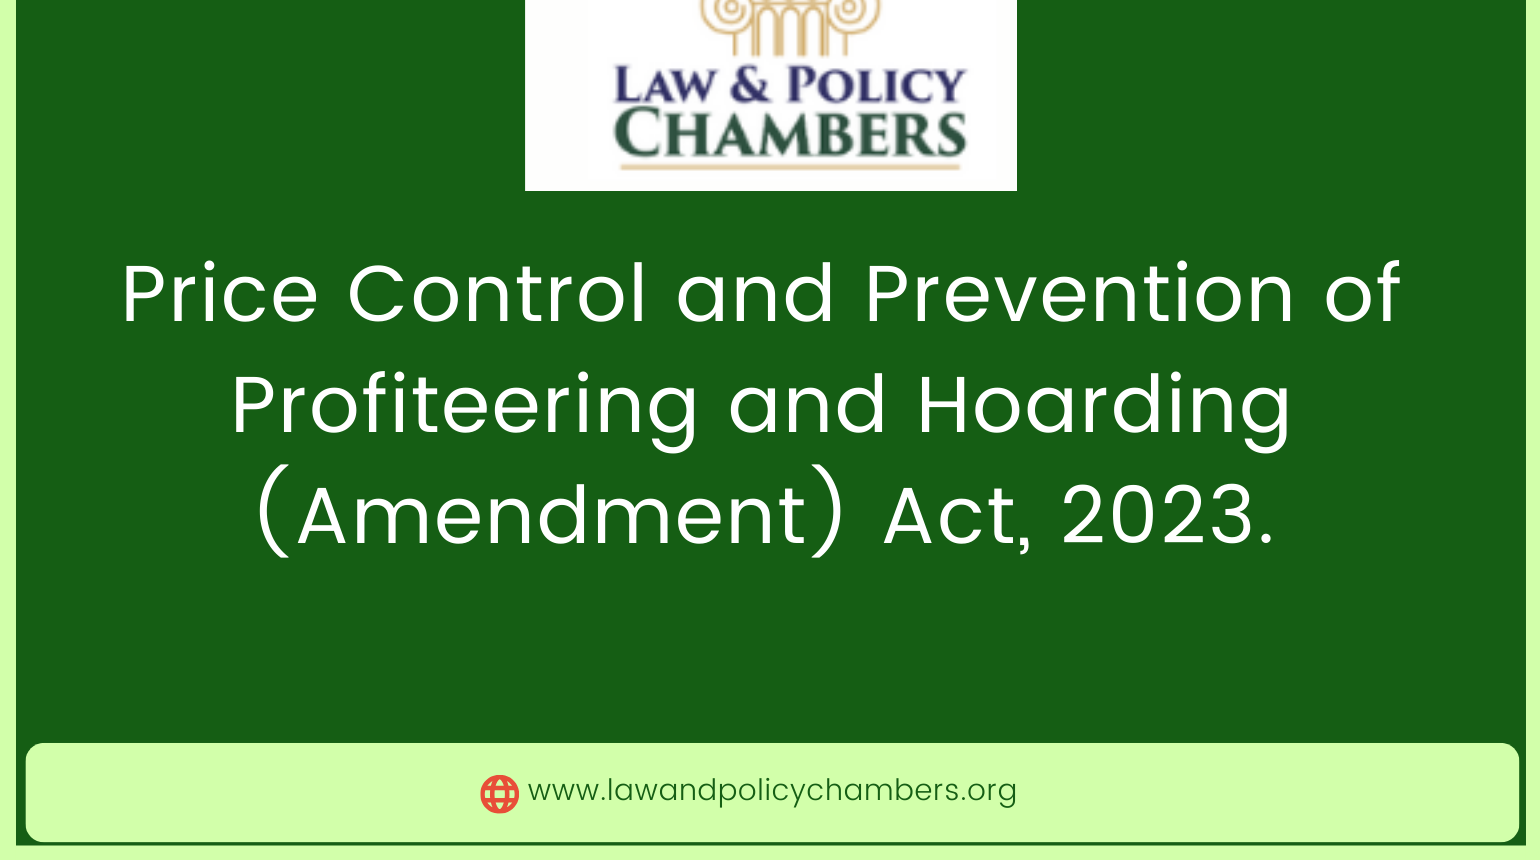 Price Control and Prevention of Profiteering and Hoarding (Amendment) Act, 2023.